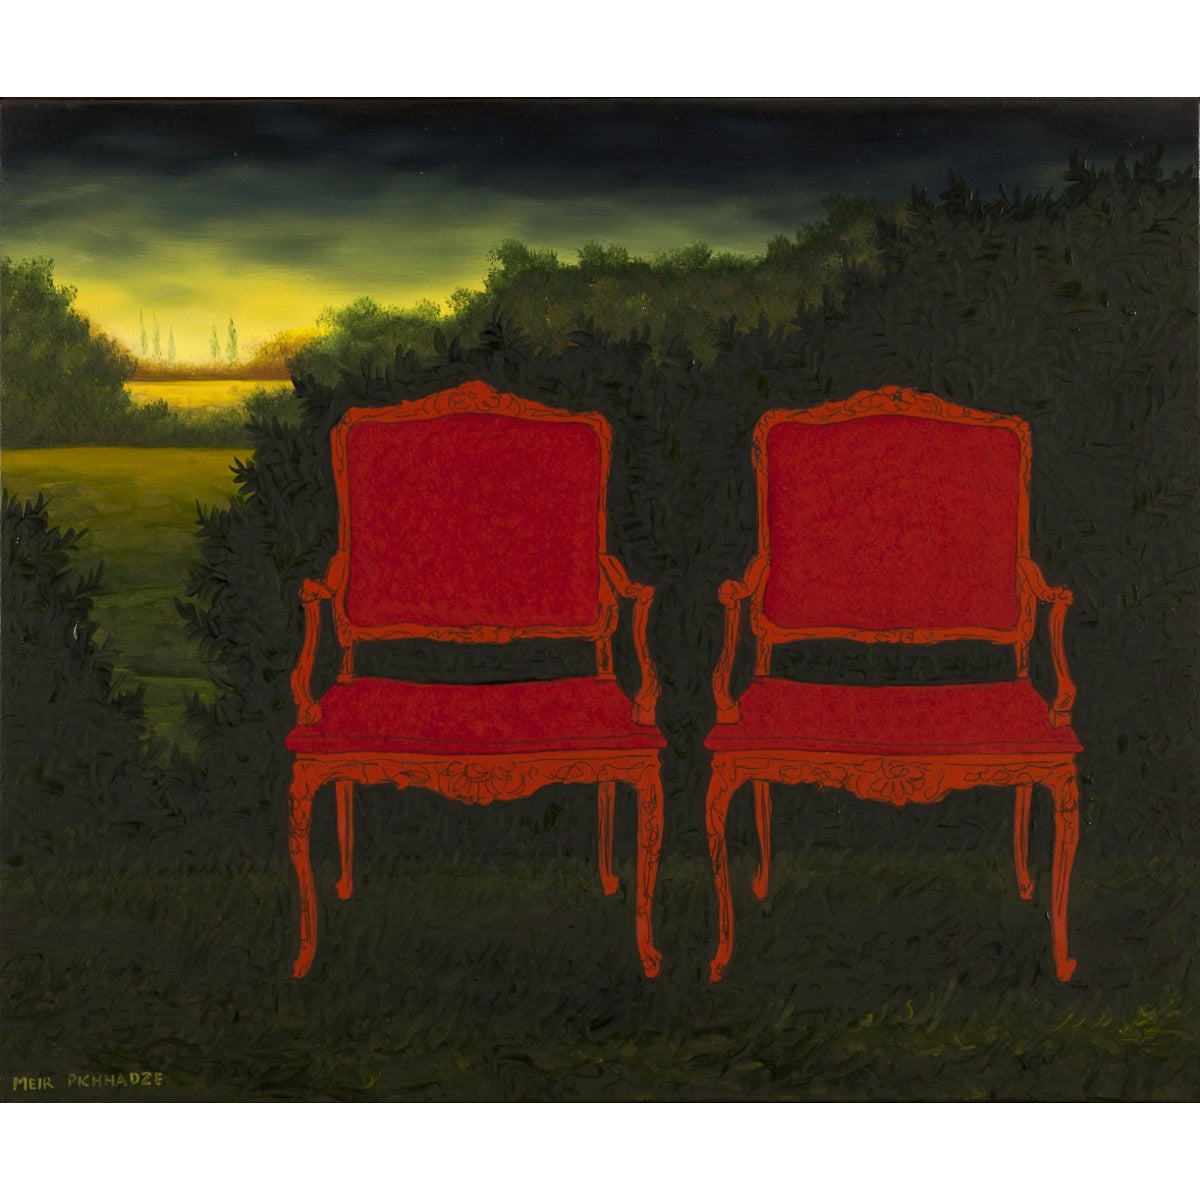 Two Red Chairs by Meir Pichhadze